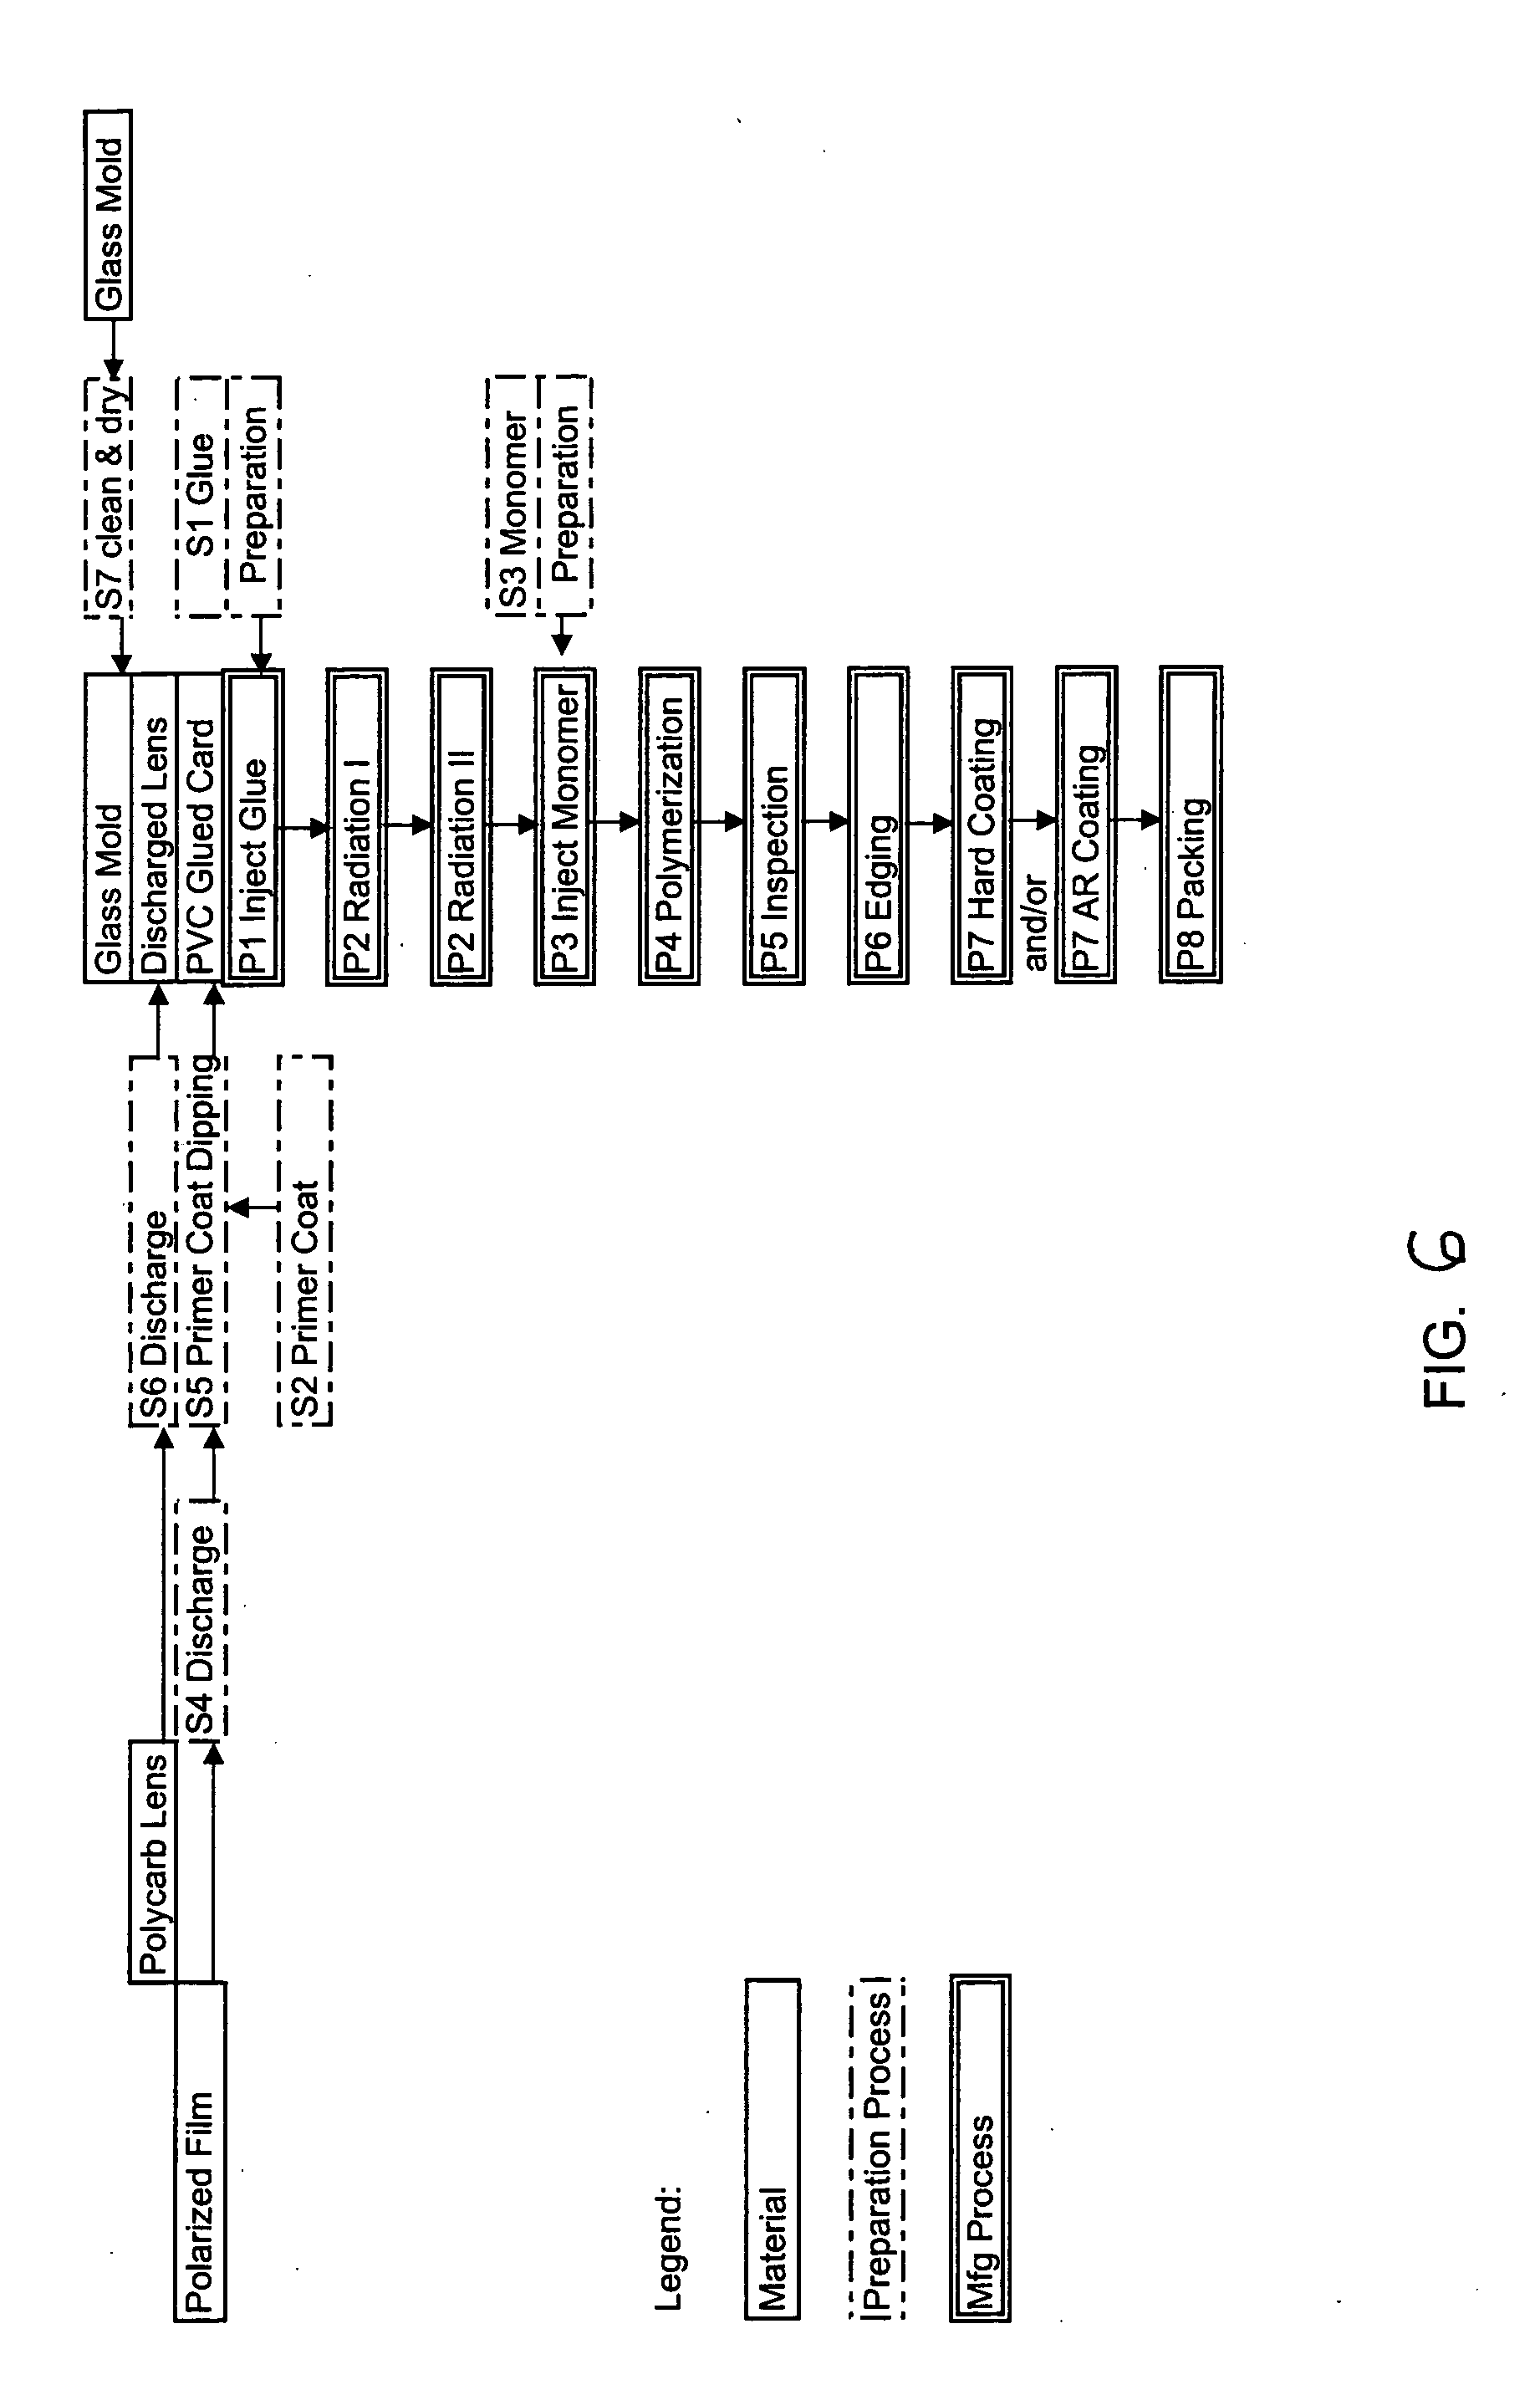 Method of forming polarized or photochromic lenses by fusing polycarbonate with other plastic materials